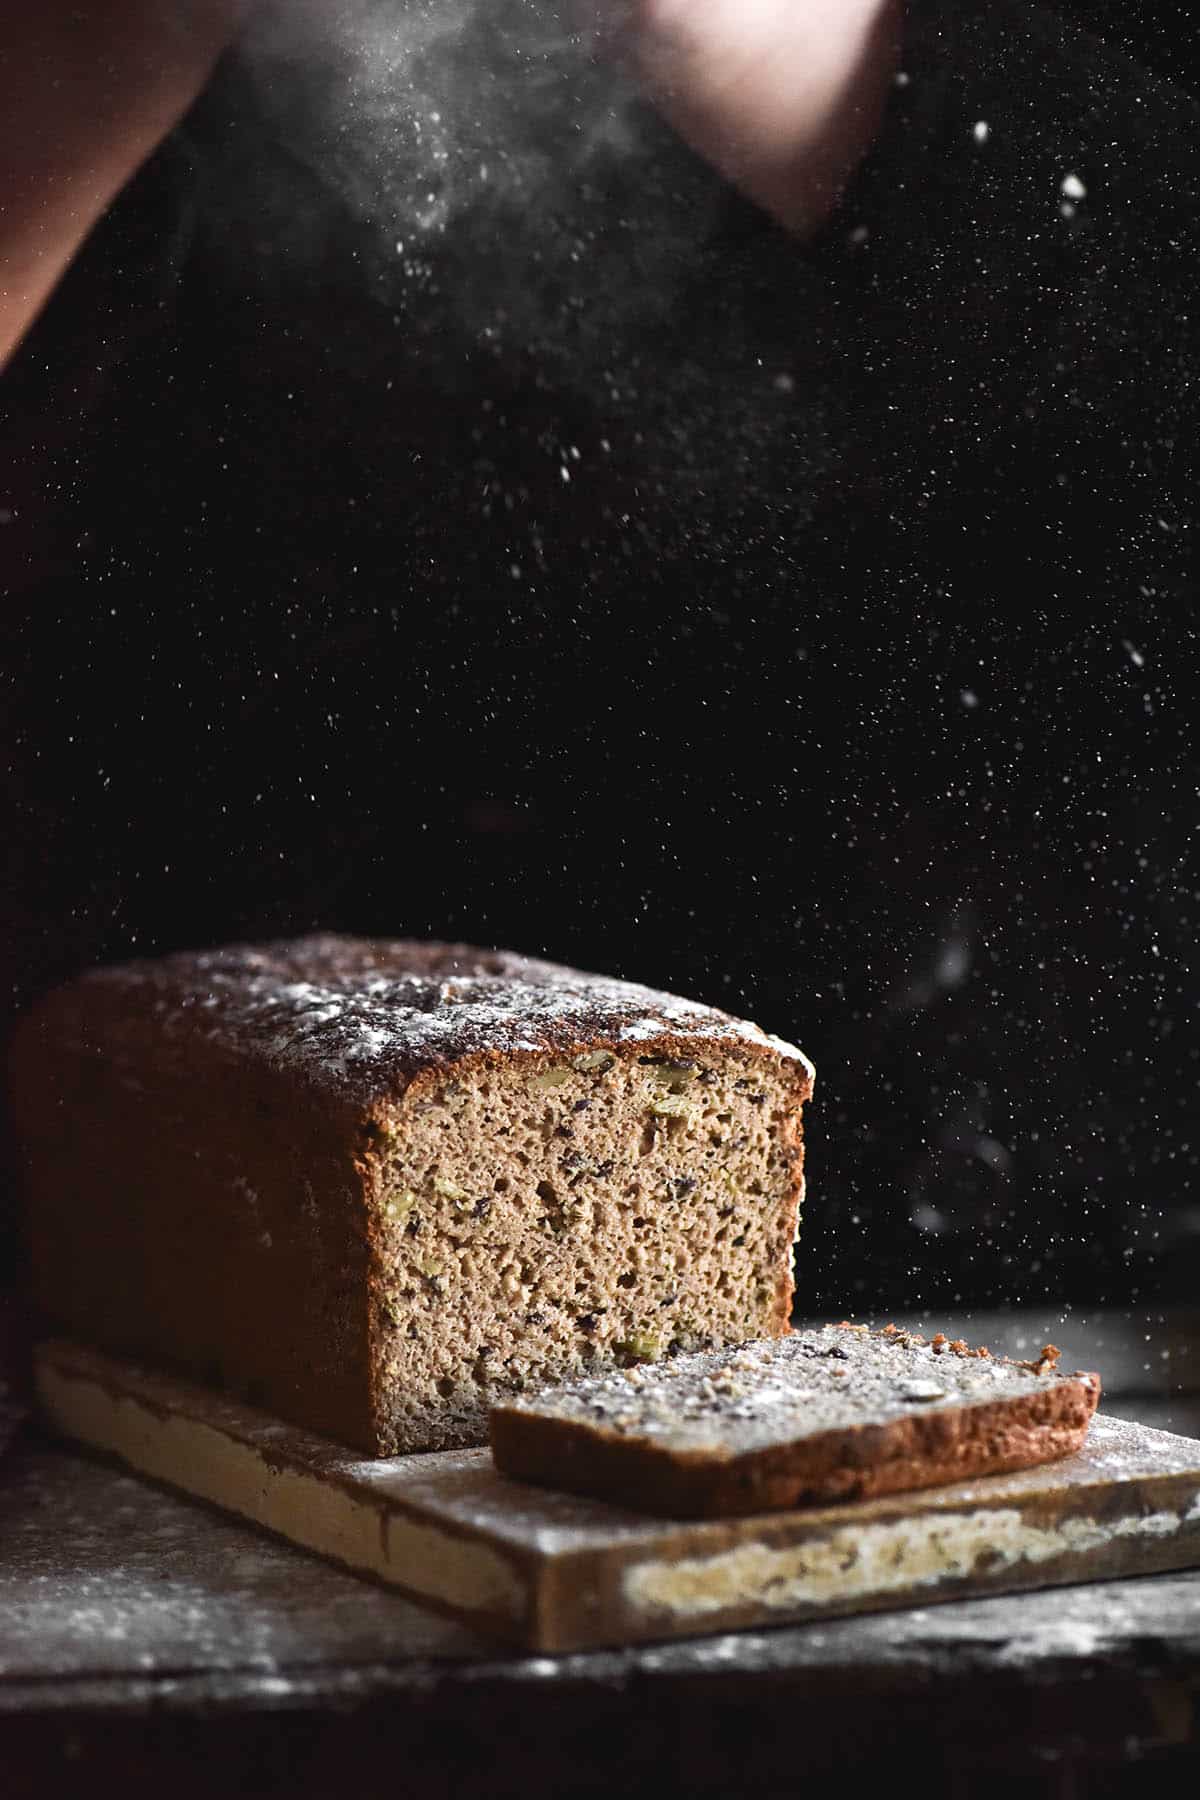 A side on view of a loaf of gluten free seeded bread against a black backdrop. A person stands behind the loaf and sprinkles flour down onto it, which contrasts against the dark backdrop